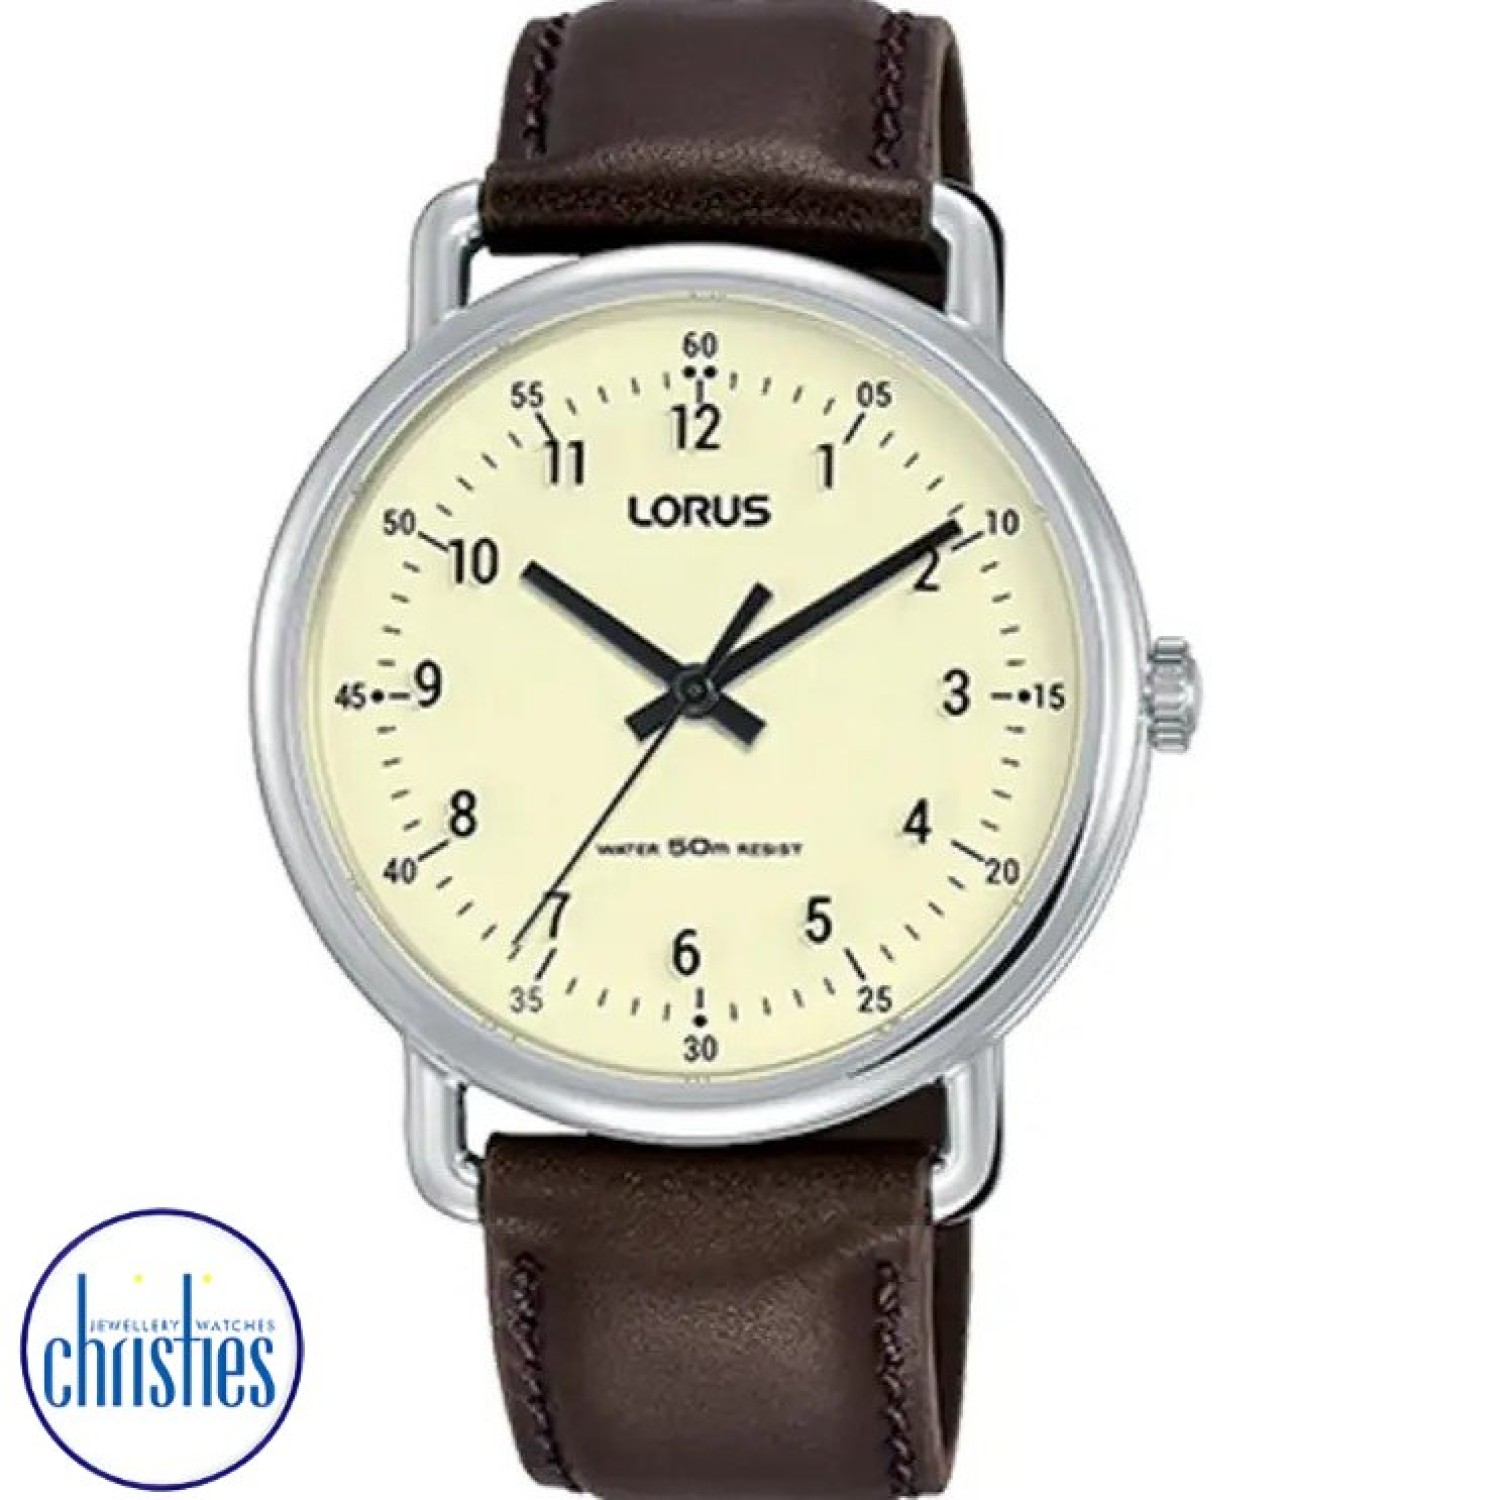 RG261NX-9 Lorus Ladies Leather Strap Watch RG261NX-9 Lorus by Seiko Auckland s offers a diverse range of watch styles, including analog, digital, sports, and dress watches